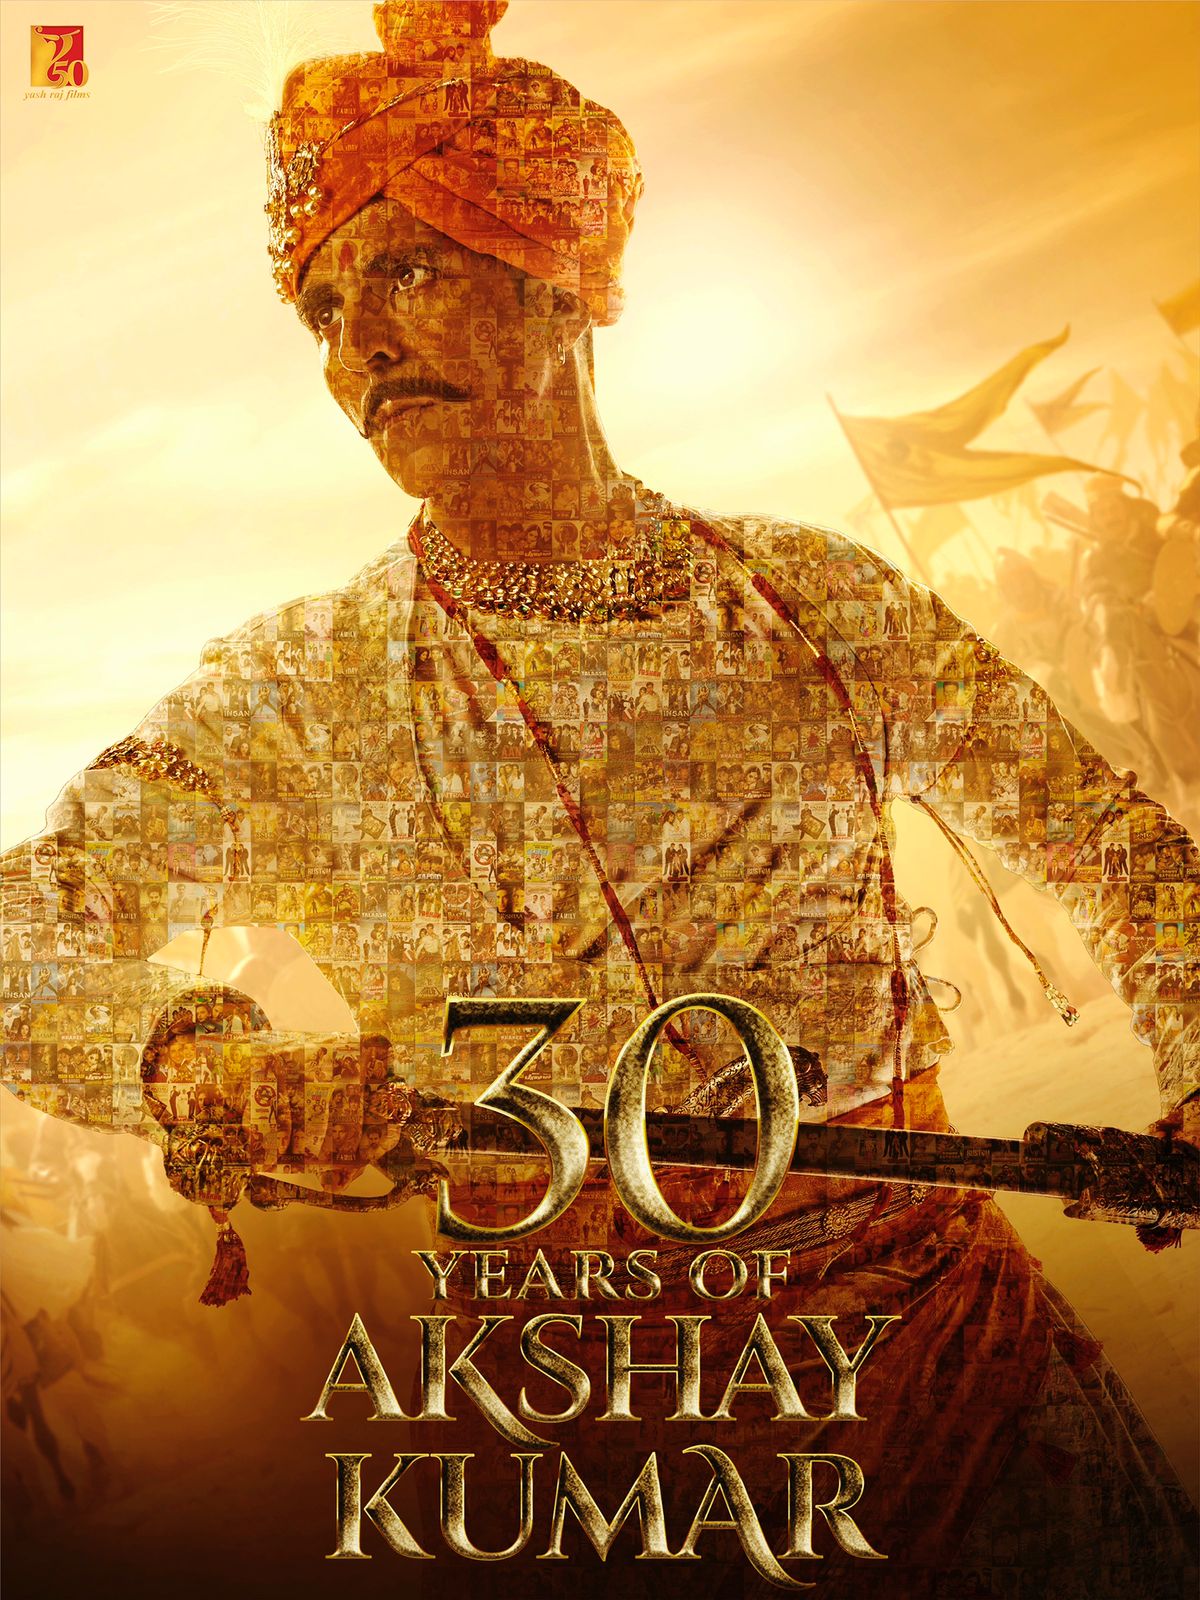 This is What Marked Akshay’s 3 Decades in the Industry